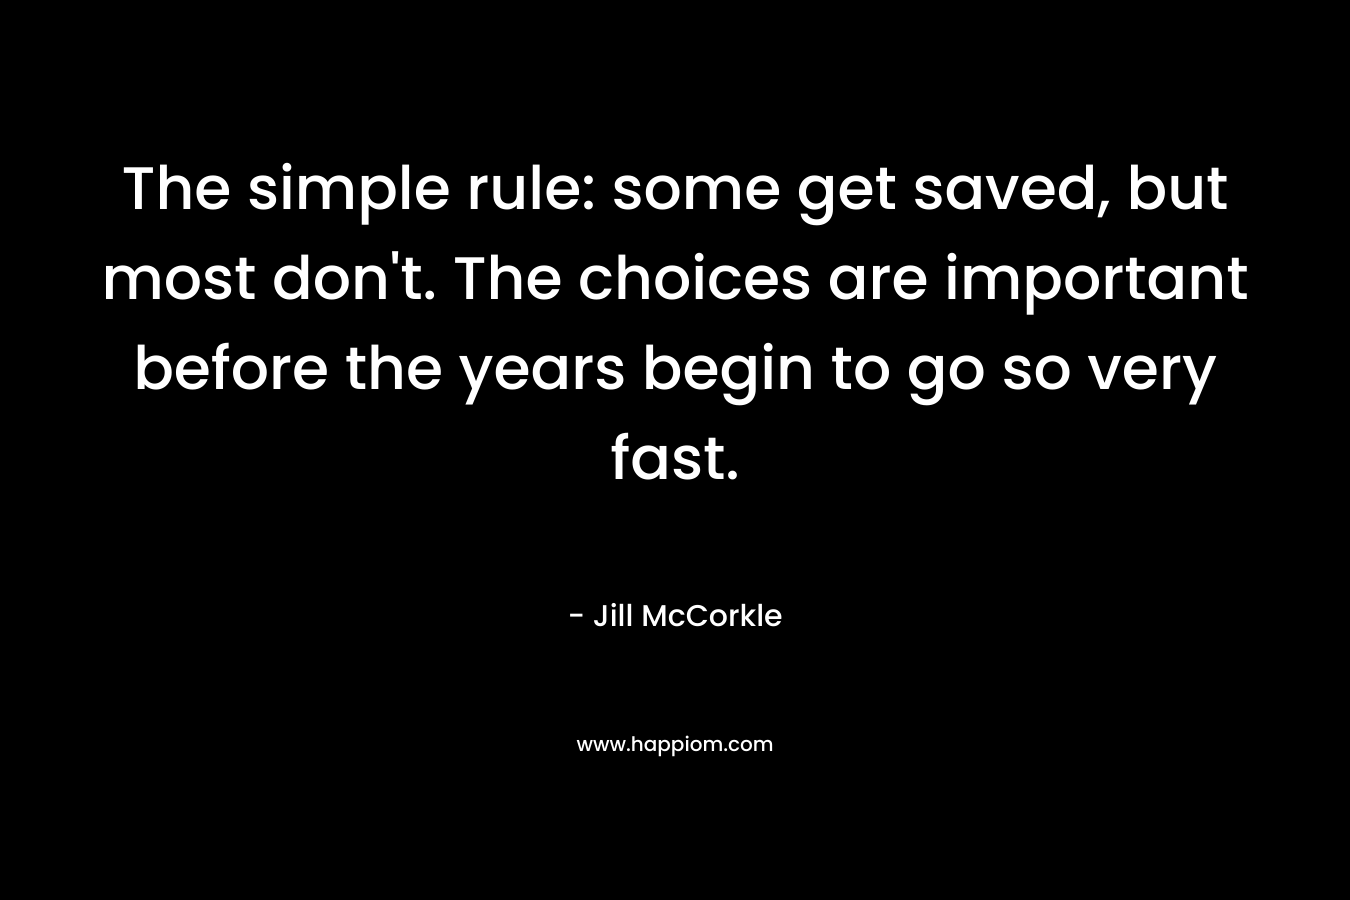 The simple rule: some get saved, but most don't. The choices are important before the years begin to go so very fast.